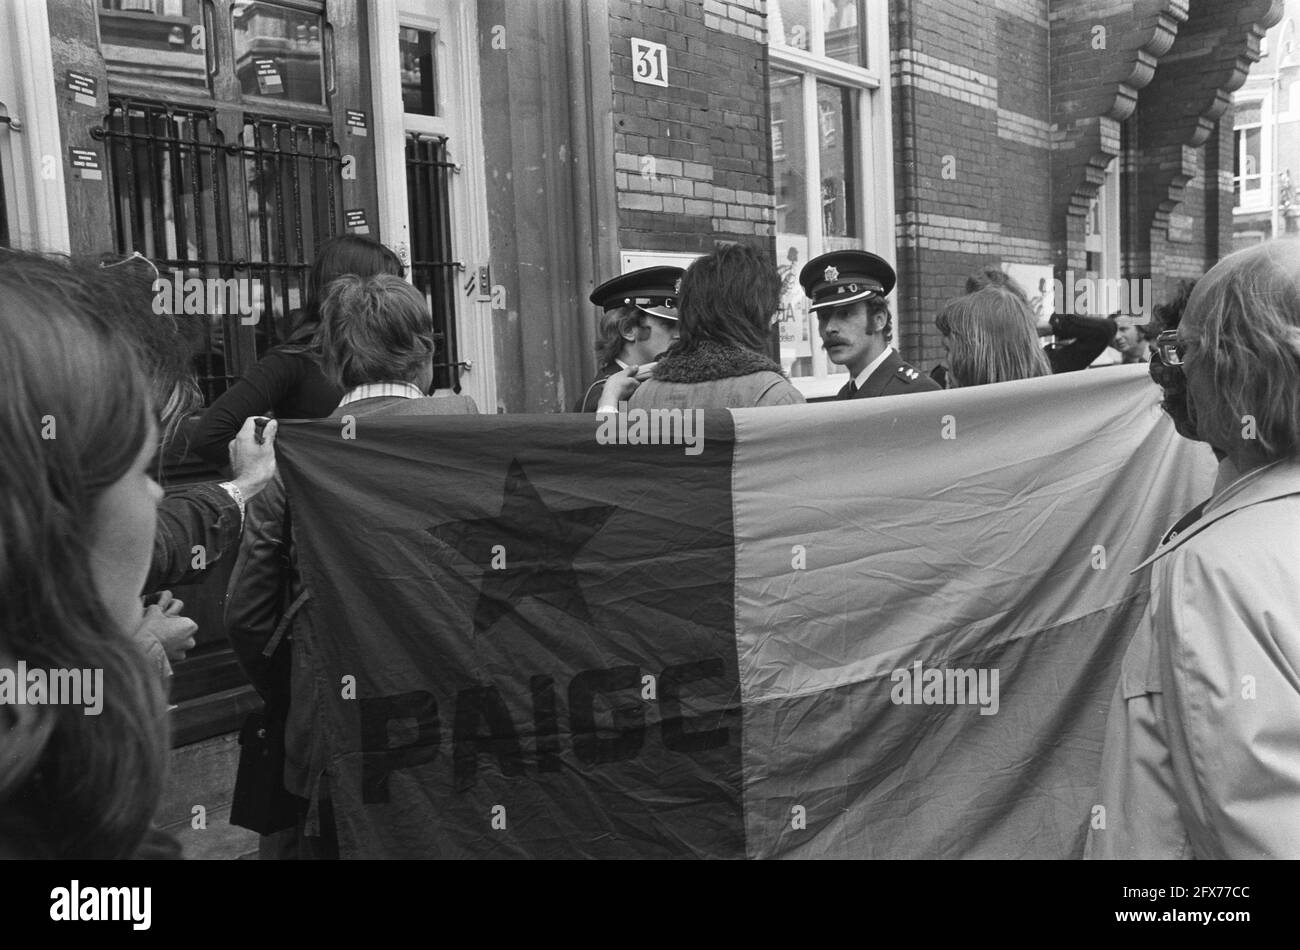 Action group tries to occupy PvdA party office in Amsterdam in connection with recognition of Guinea Bissau, demonstrators flag of PAIGG liberation movement, discussing with, 28 May 1974, POLICE, action groups, occupations, demonstrators, flags, The Netherlands, 20th century press agency photo, news to remember, documentary, historic photography 1945-1990, visual stories, human history of the Twentieth Century, capturing moments in time Stock Photo